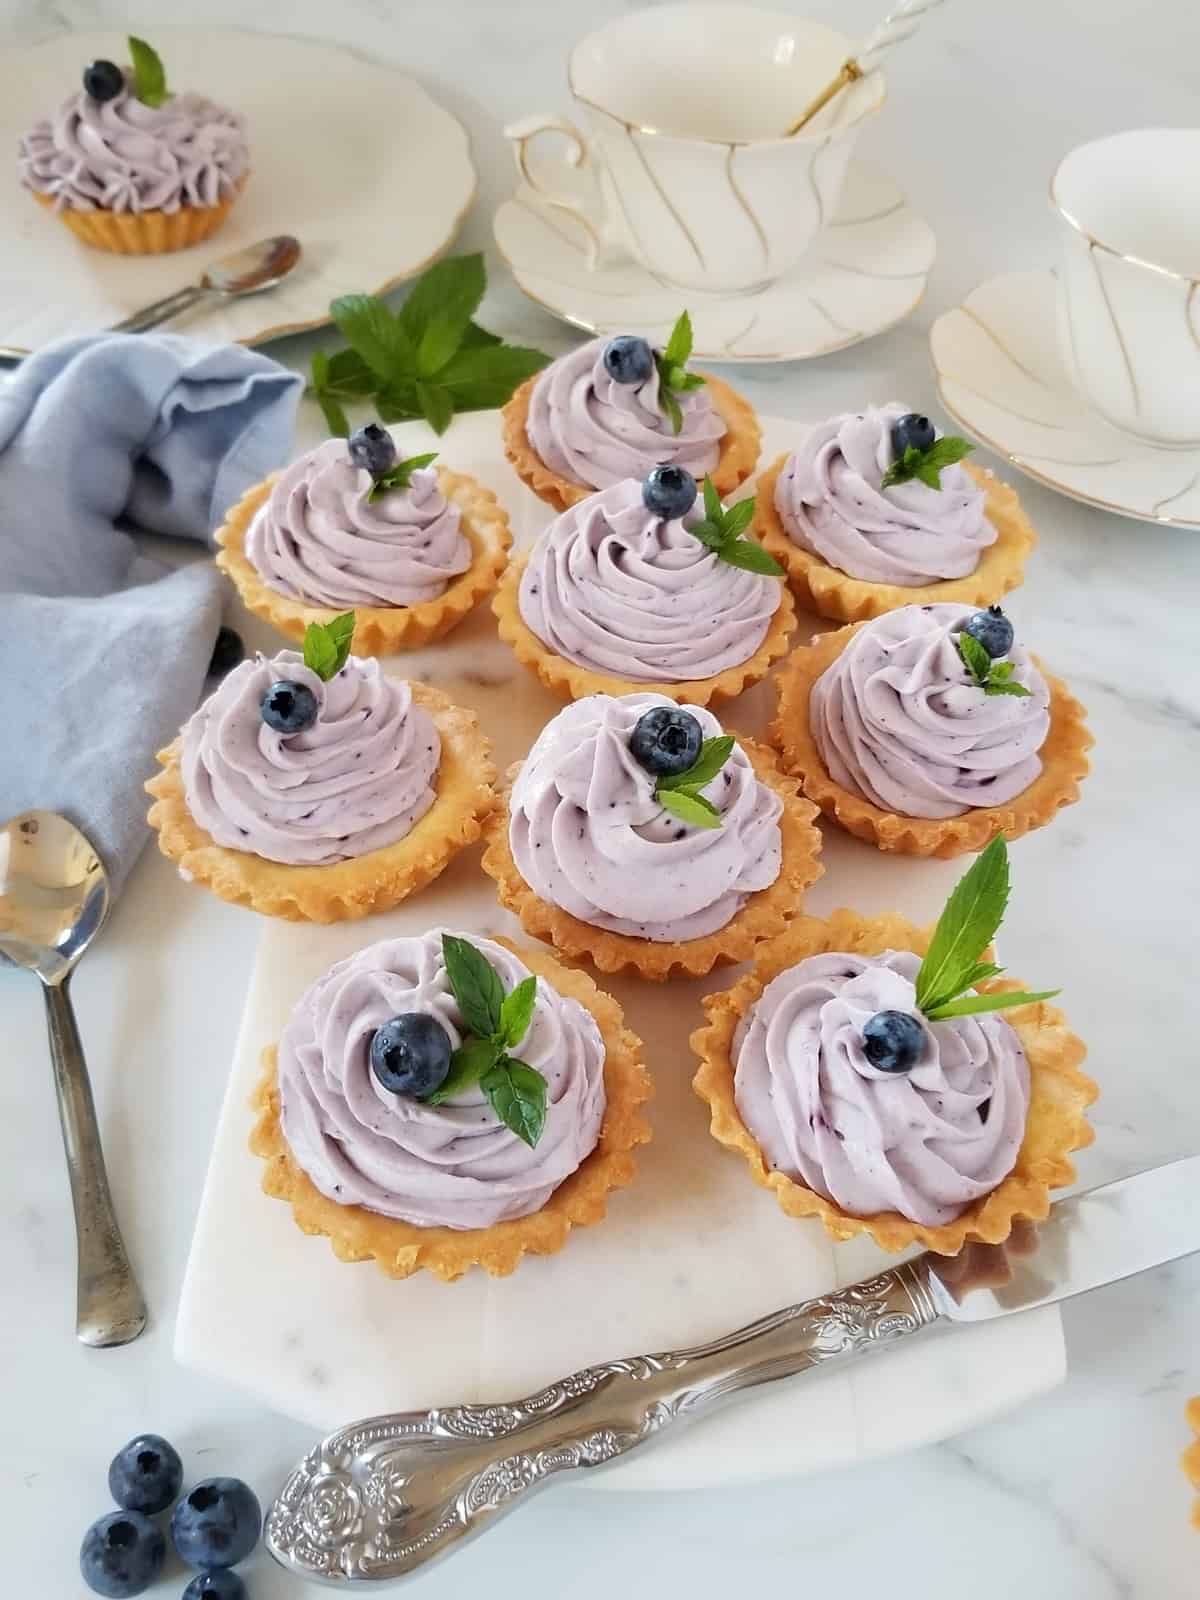 mini tarts filled with blueberry mascarpone cream, decorated with fresh blueberries and mint leaves